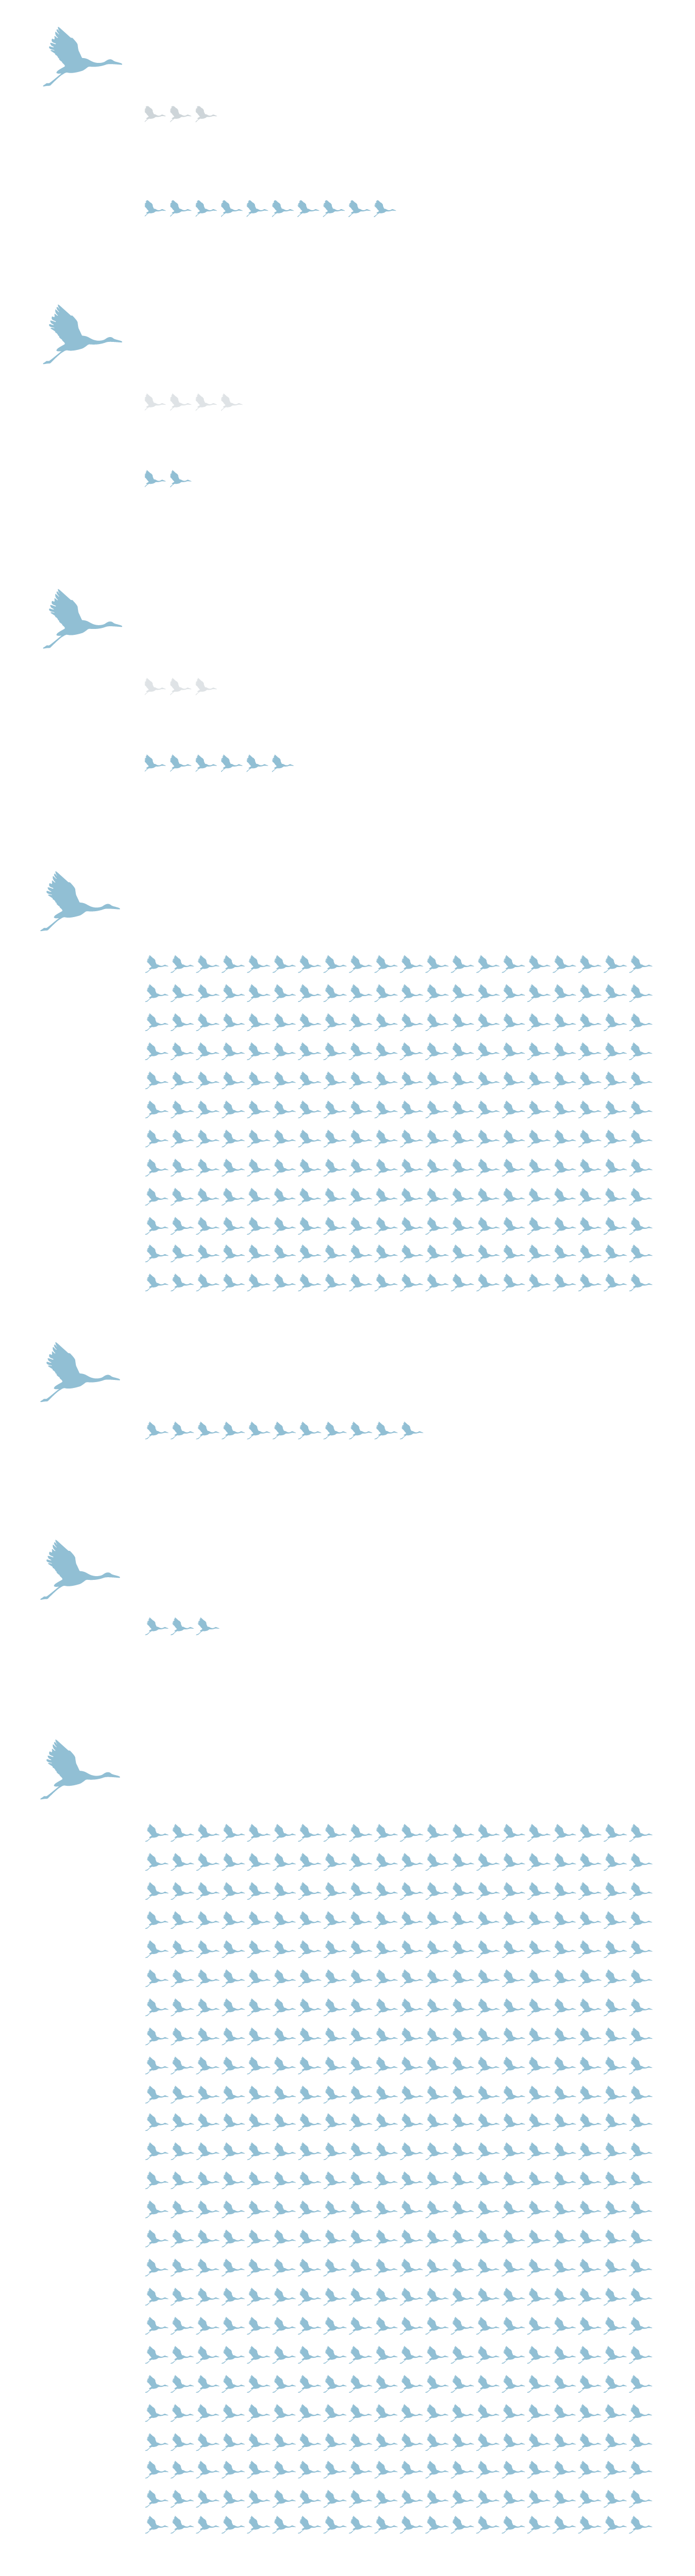 Graphic showing the historic population of Cranes — East Asian